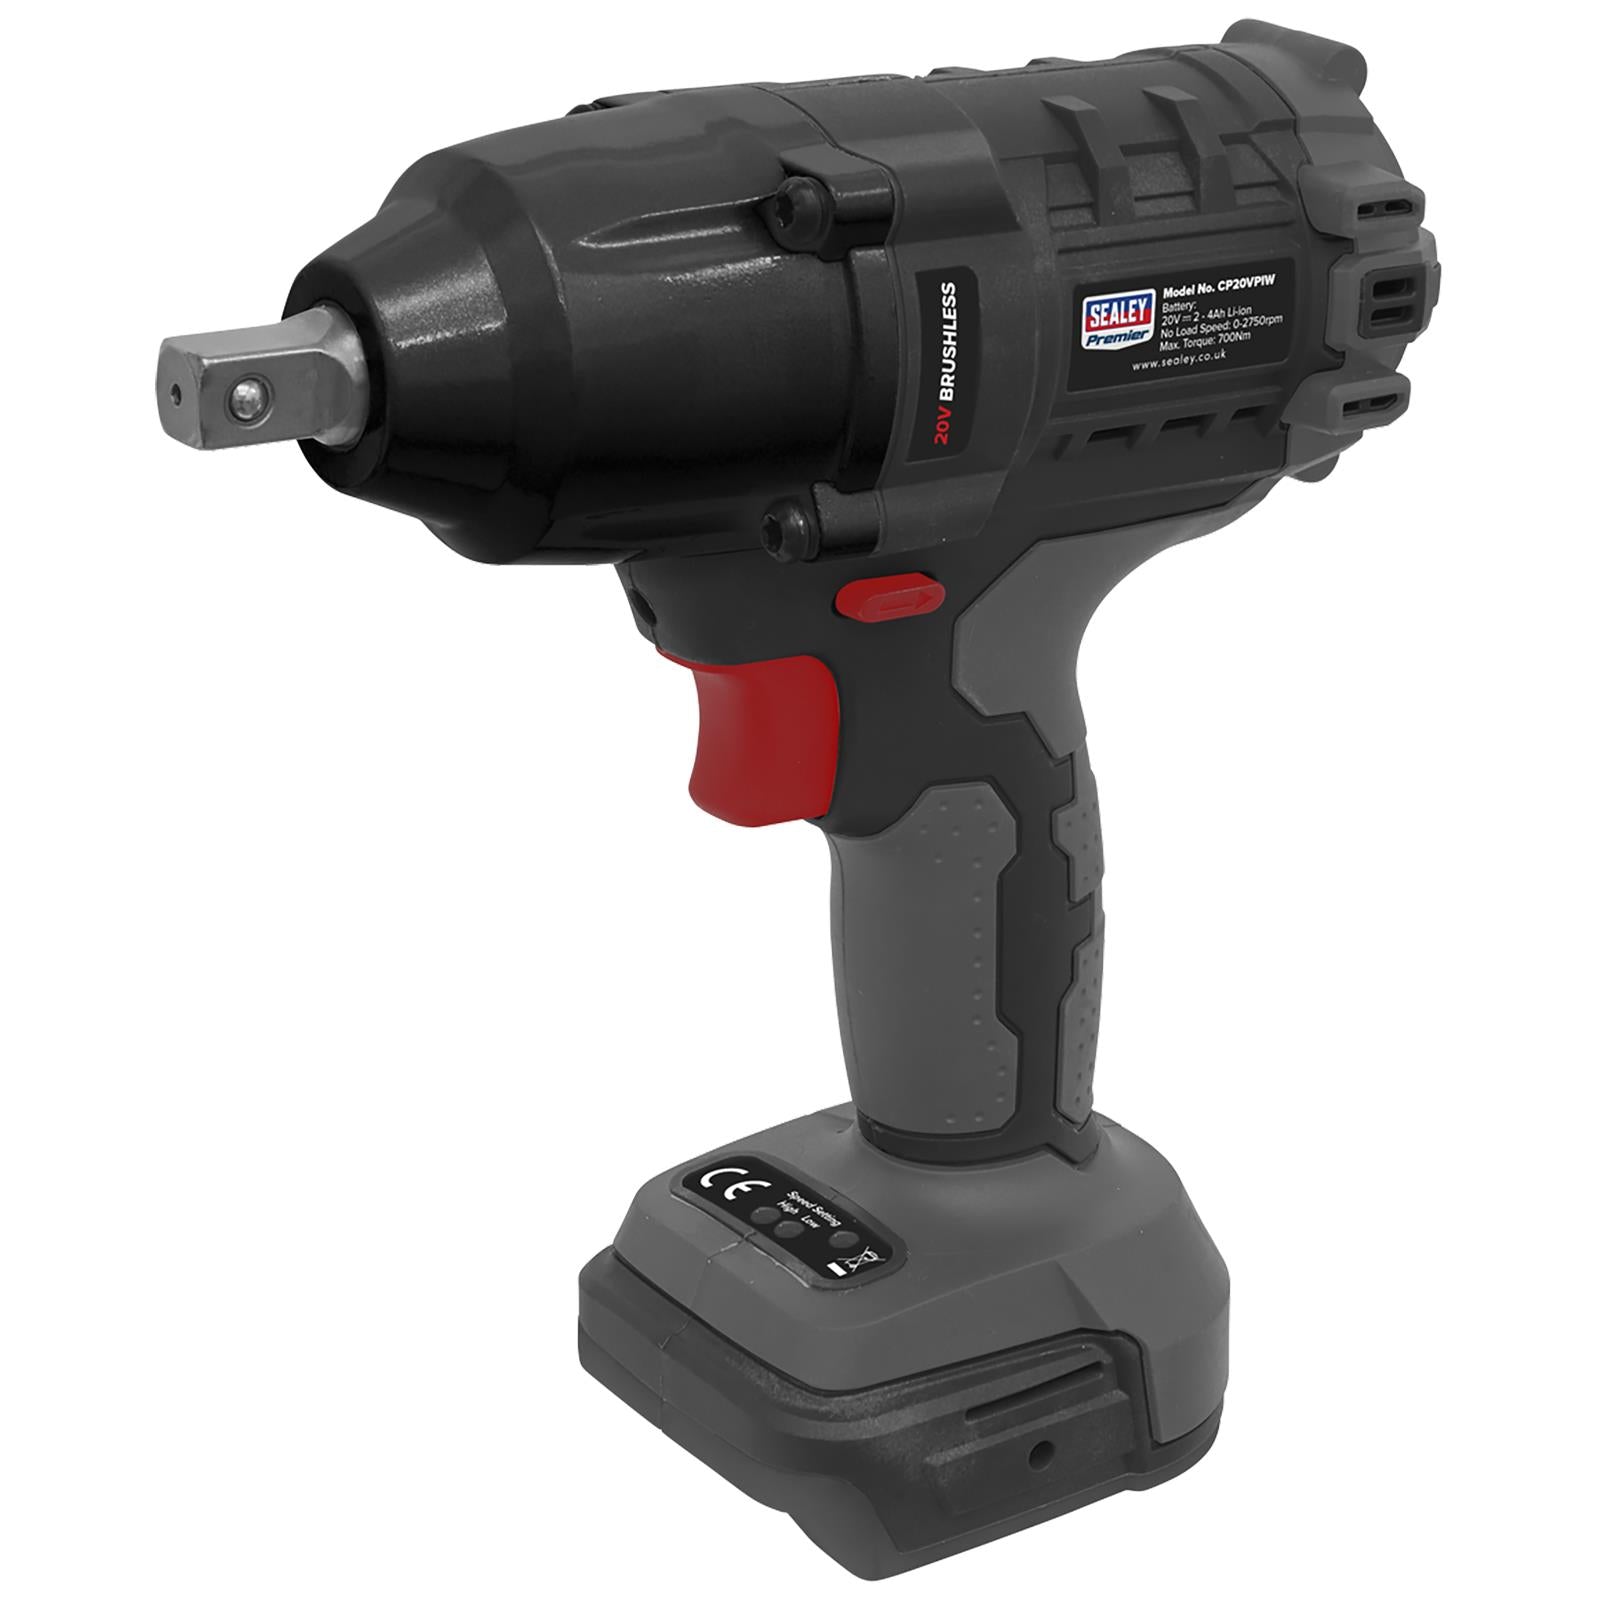 Sealey Cordless Impact Wrench 20V 1/2" Drive Brushless 700Nm Body Only